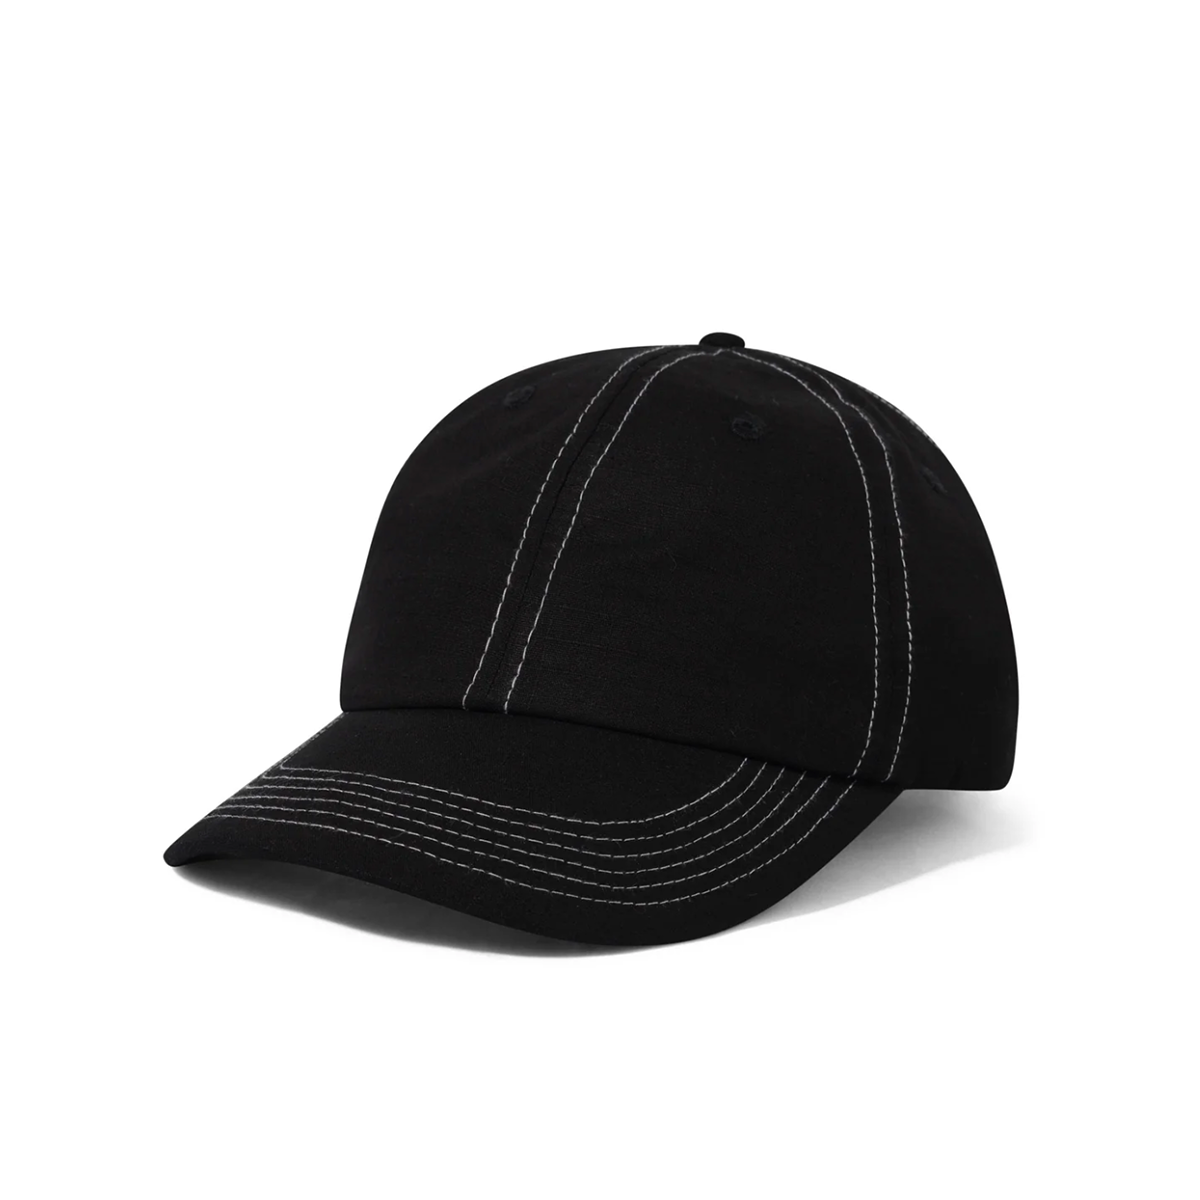 Butter Ripstop 6 Panel Hat - Assorted Colors